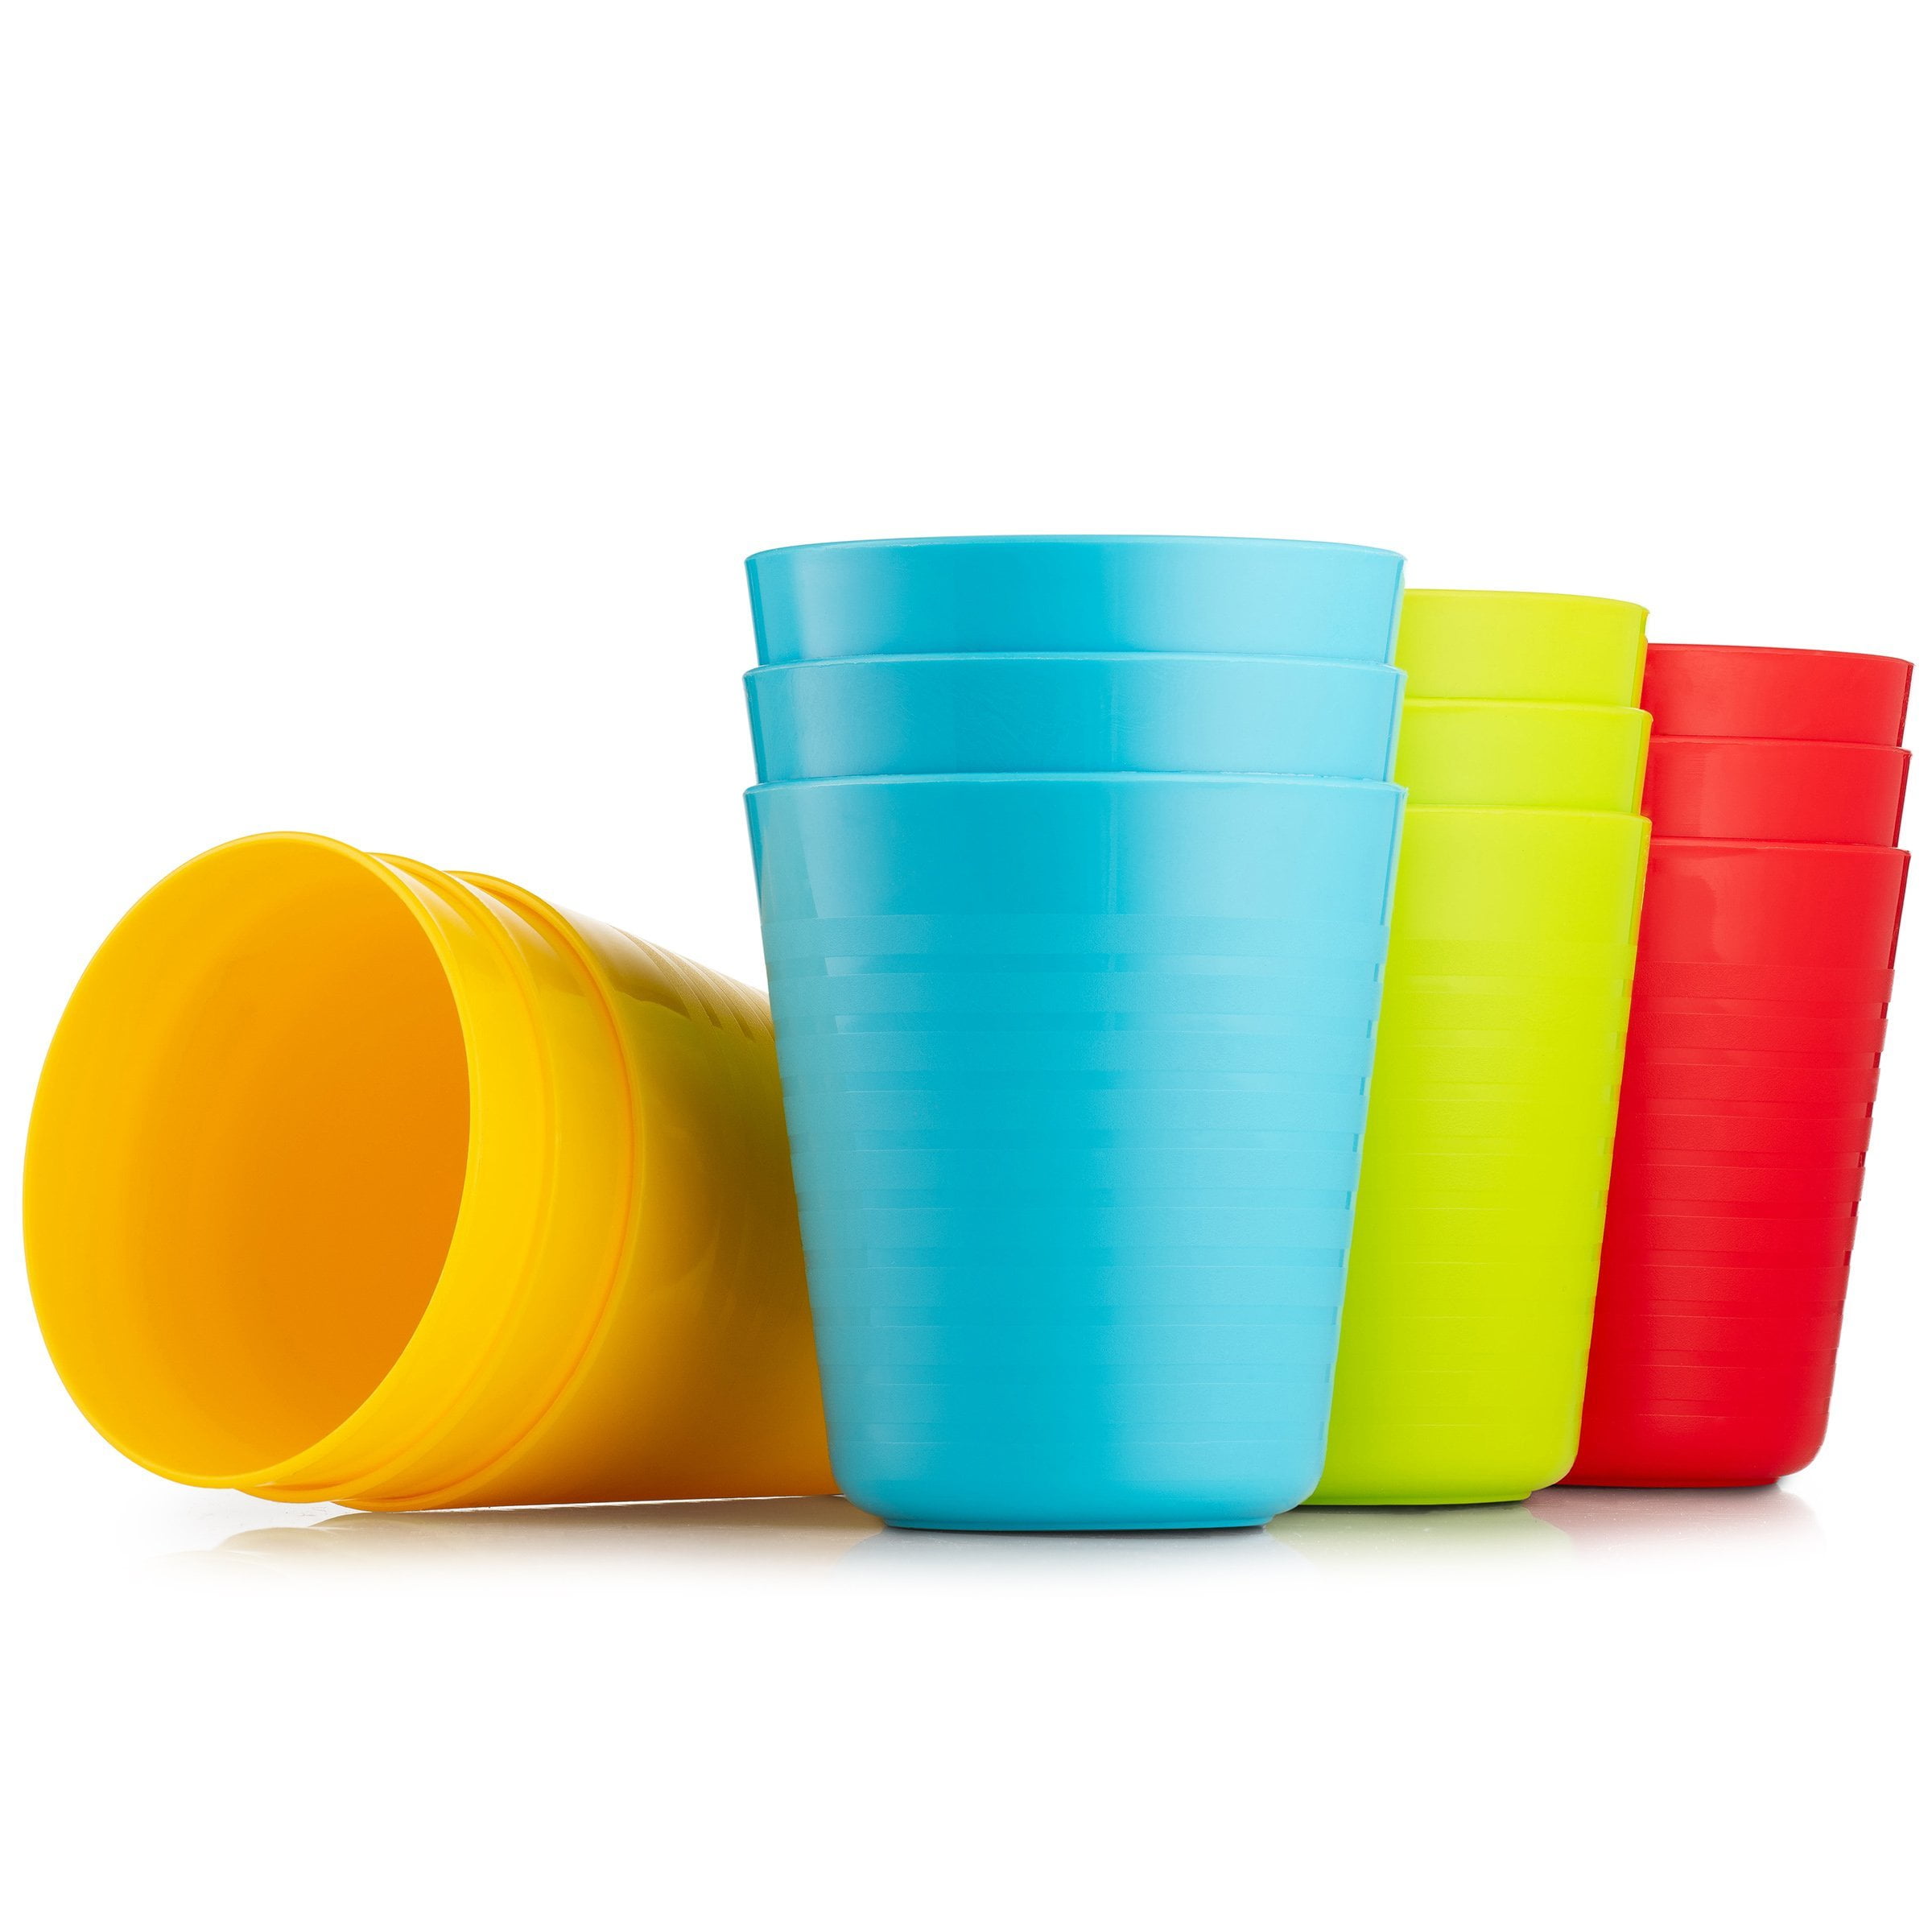 ZEAYEA 8 Pack Bamboo Kids Cups, 8 Oz BPA Free Bamboo Drinking Cups for  Children, Reusable Cute Cups …See more ZEAYEA 8 Pack Bamboo Kids Cups, 8 Oz  BPA